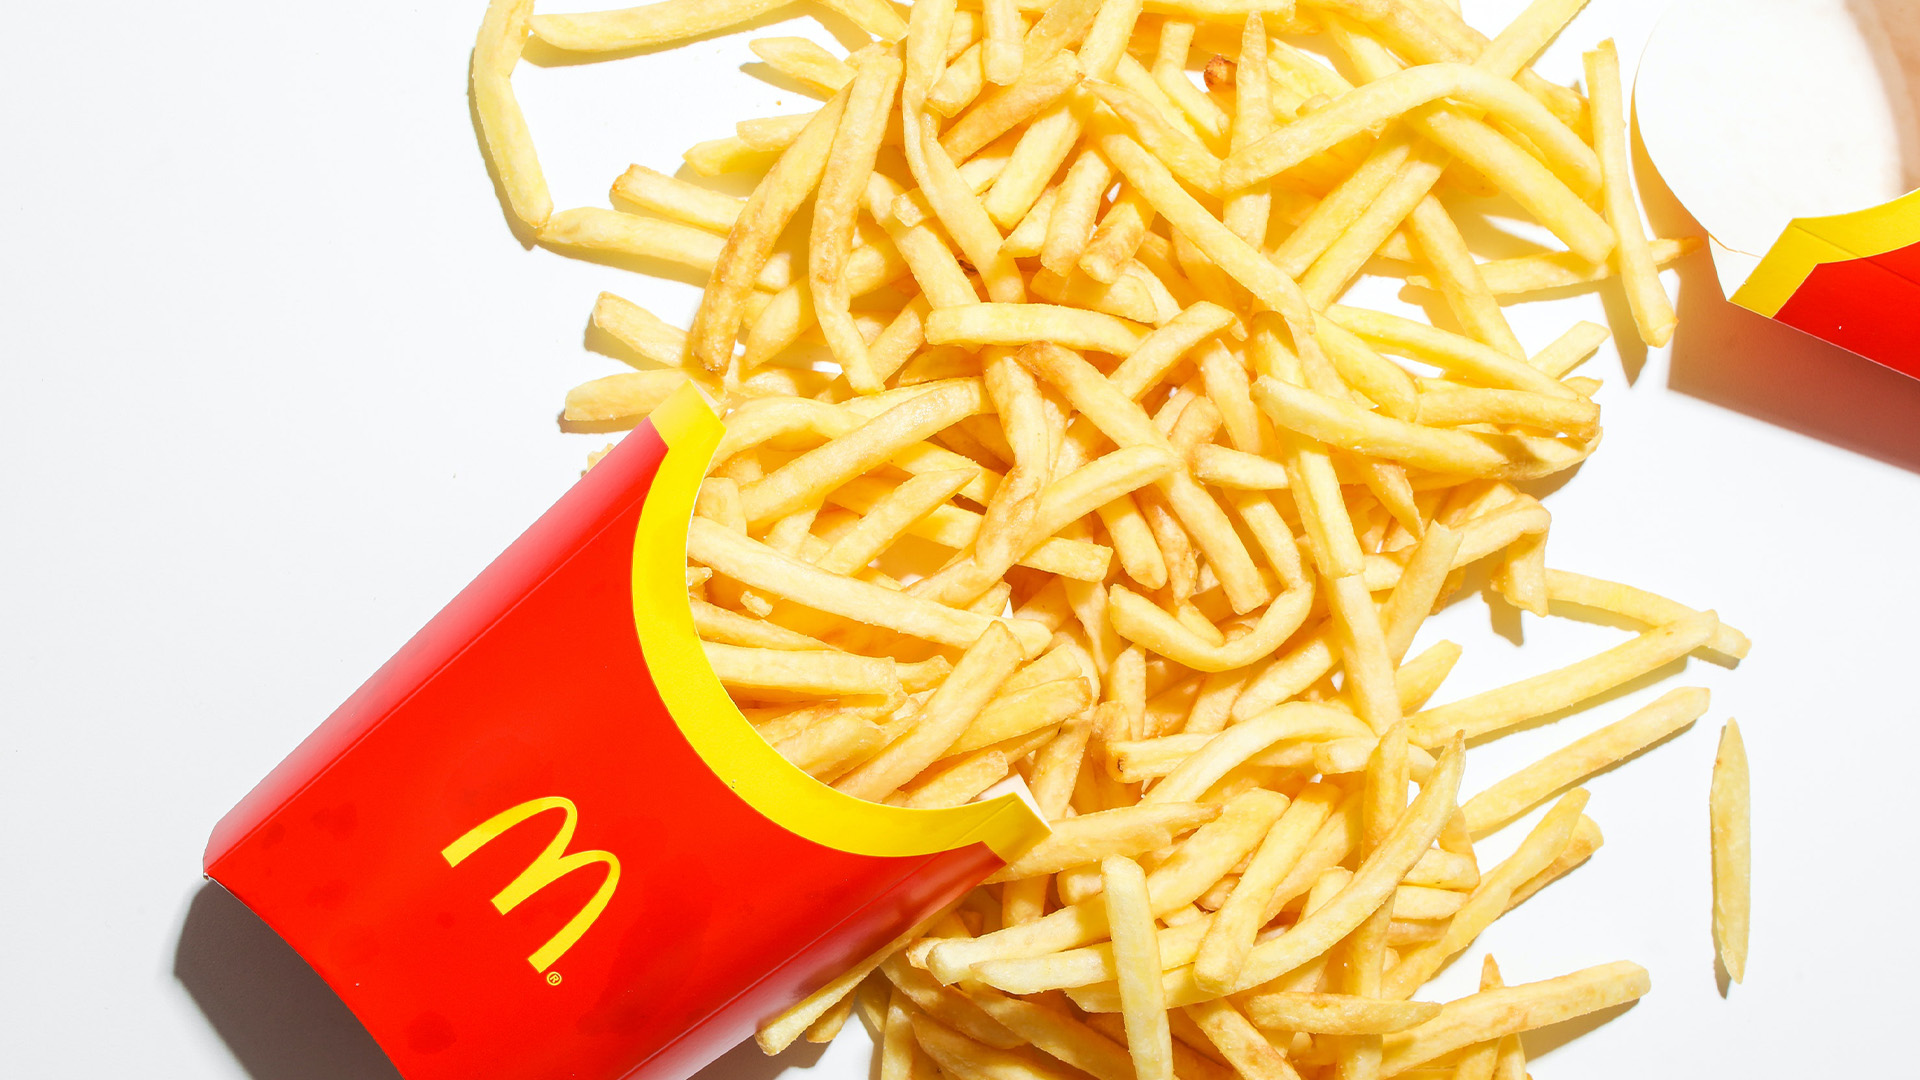 A pile of spilled french fries coming out of a McDonalds container